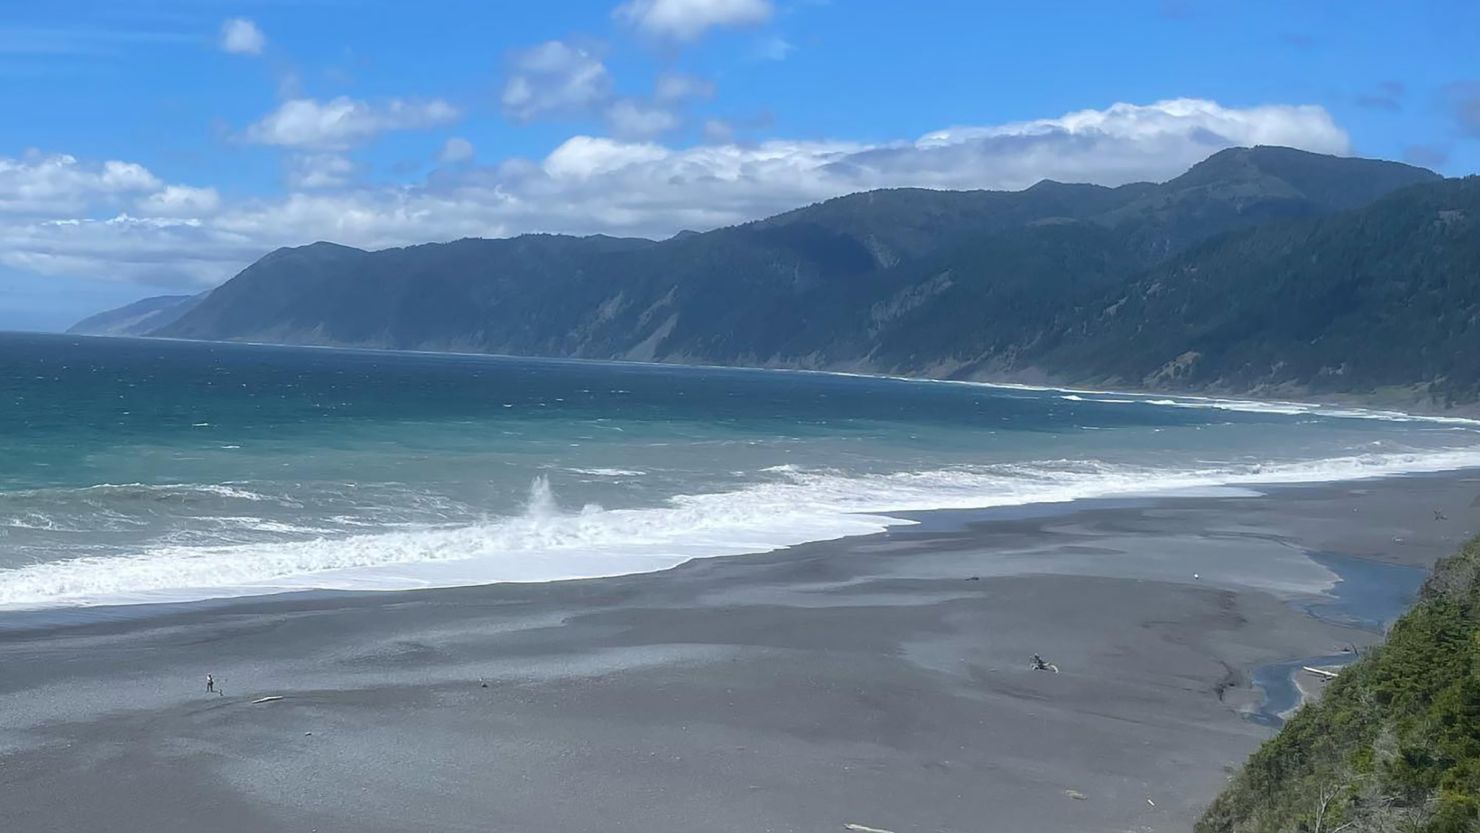 The hikers were swept into the ocean along the Lost Coast Trail near Shelter Cove, California.